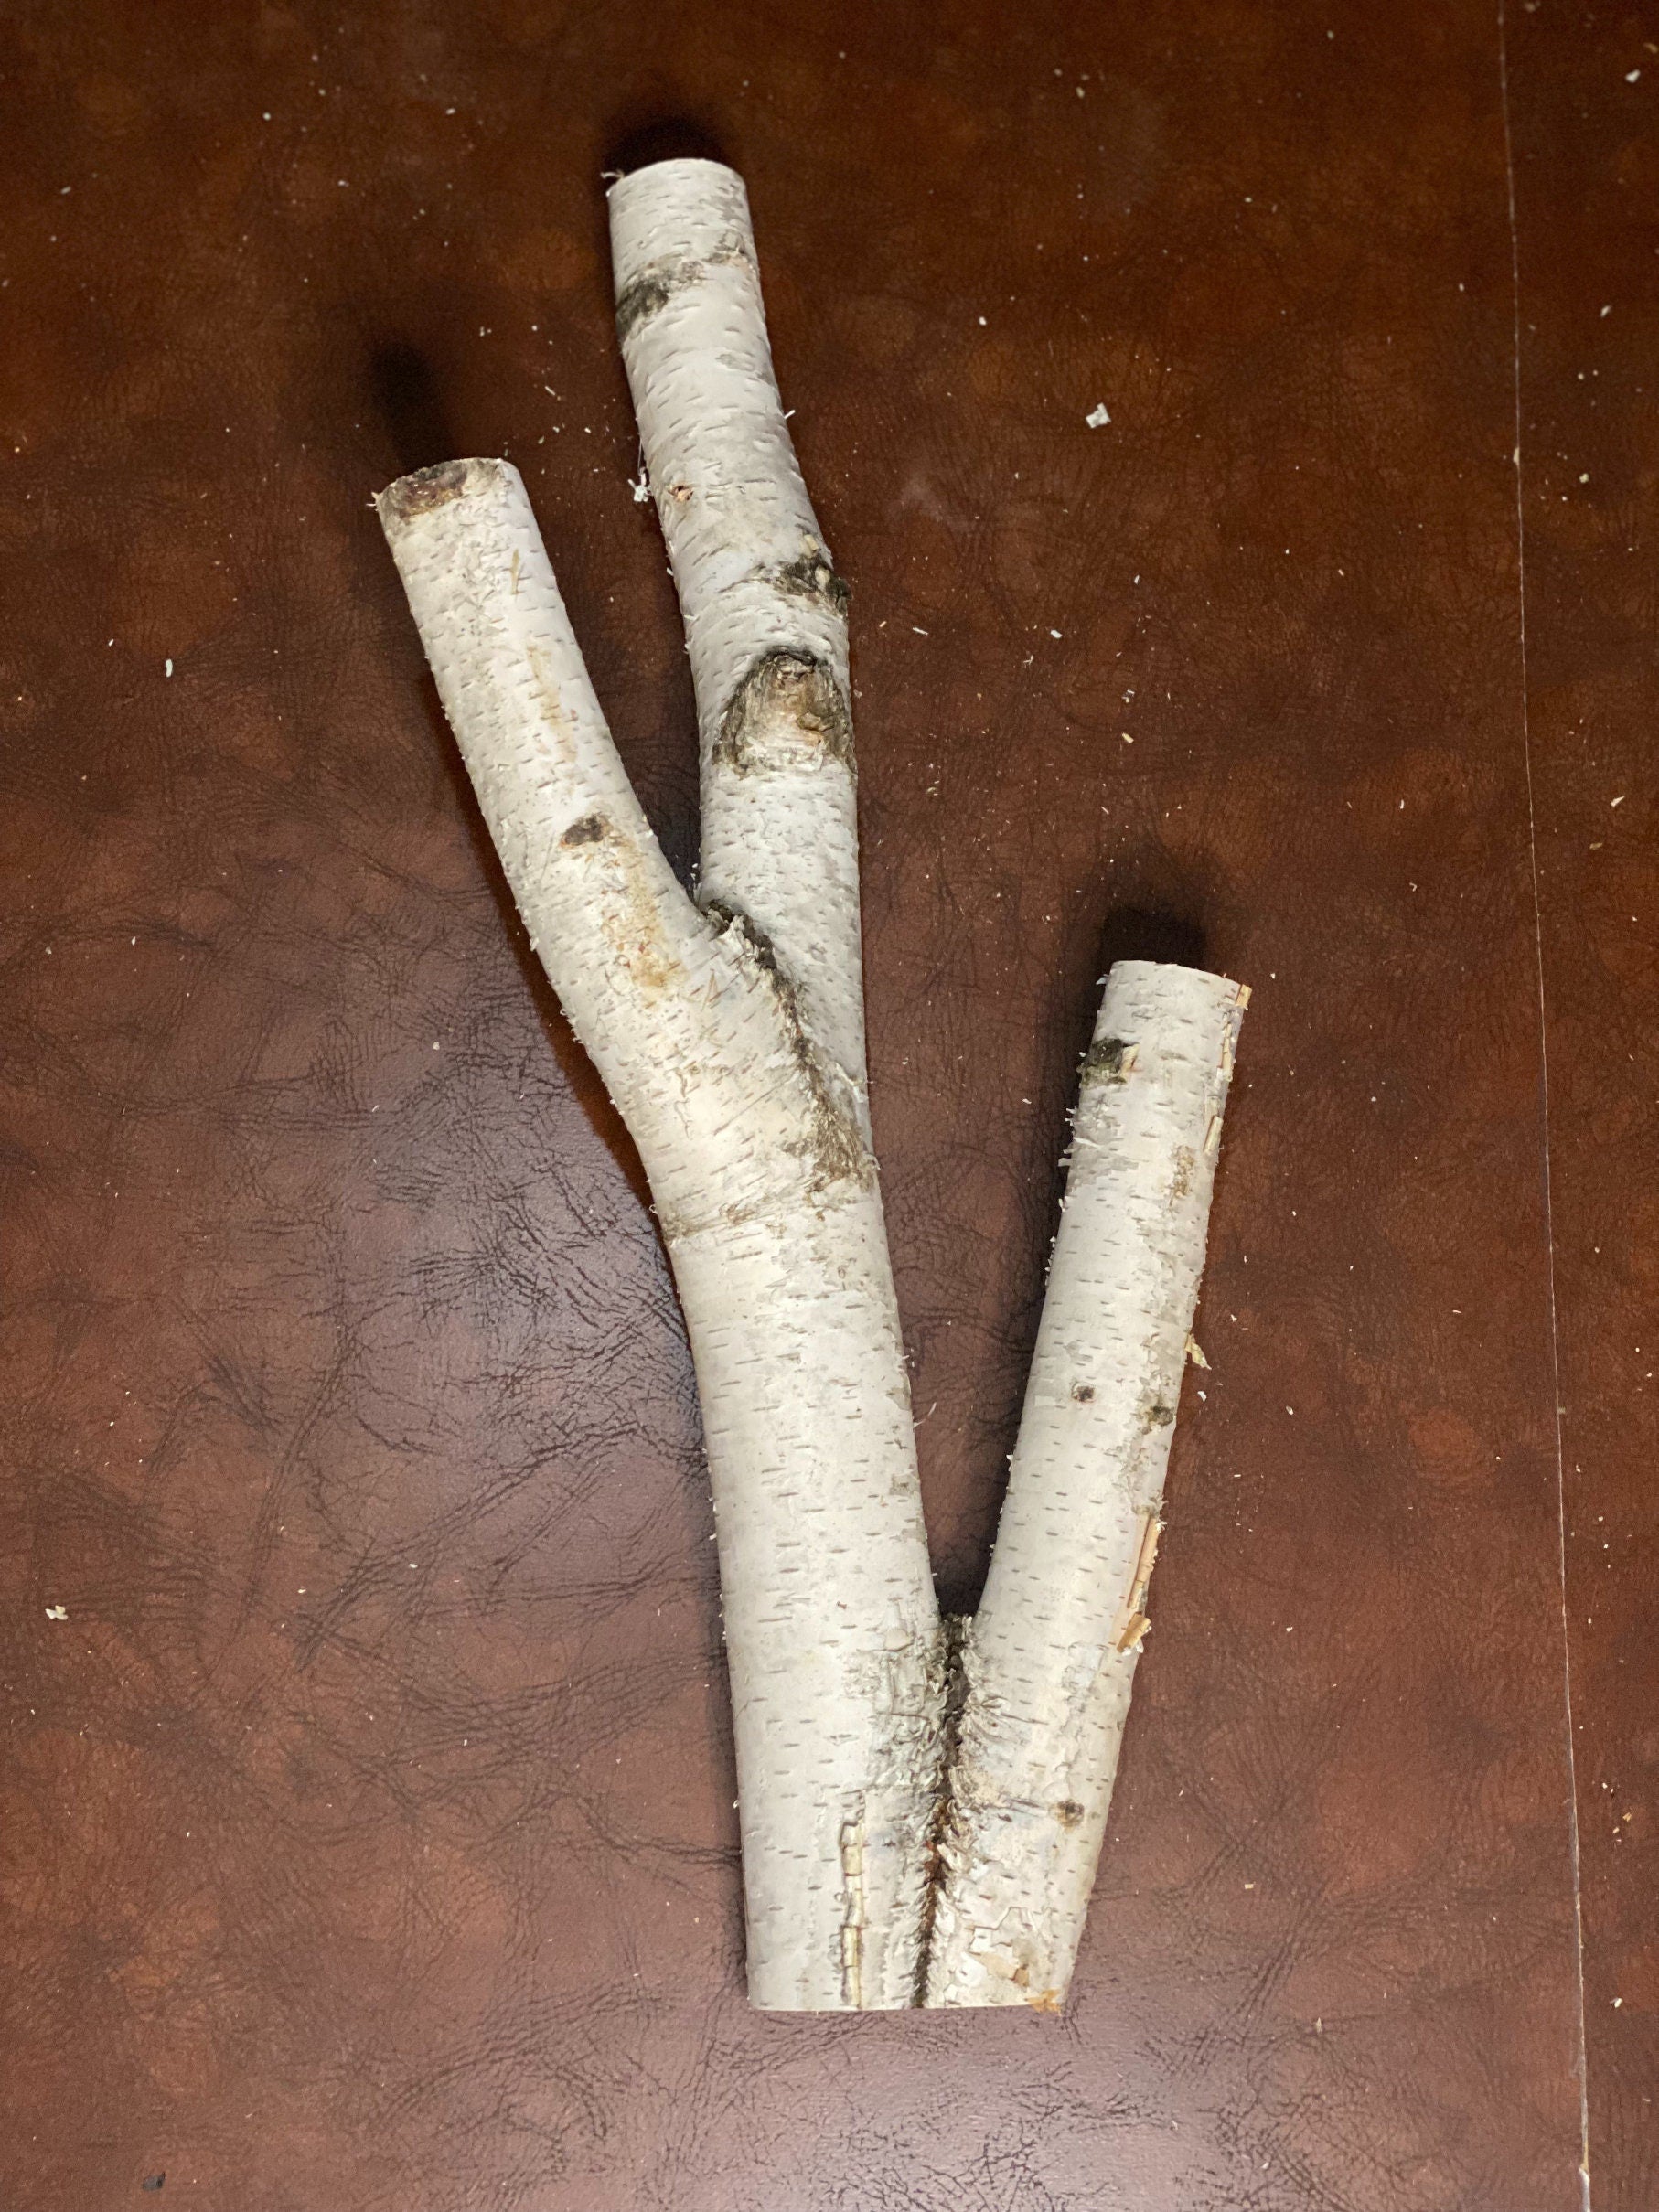 White Birch 3-Prong Log, About 24 Inches Long by 12 Inches Wide by 4 Inches Thick